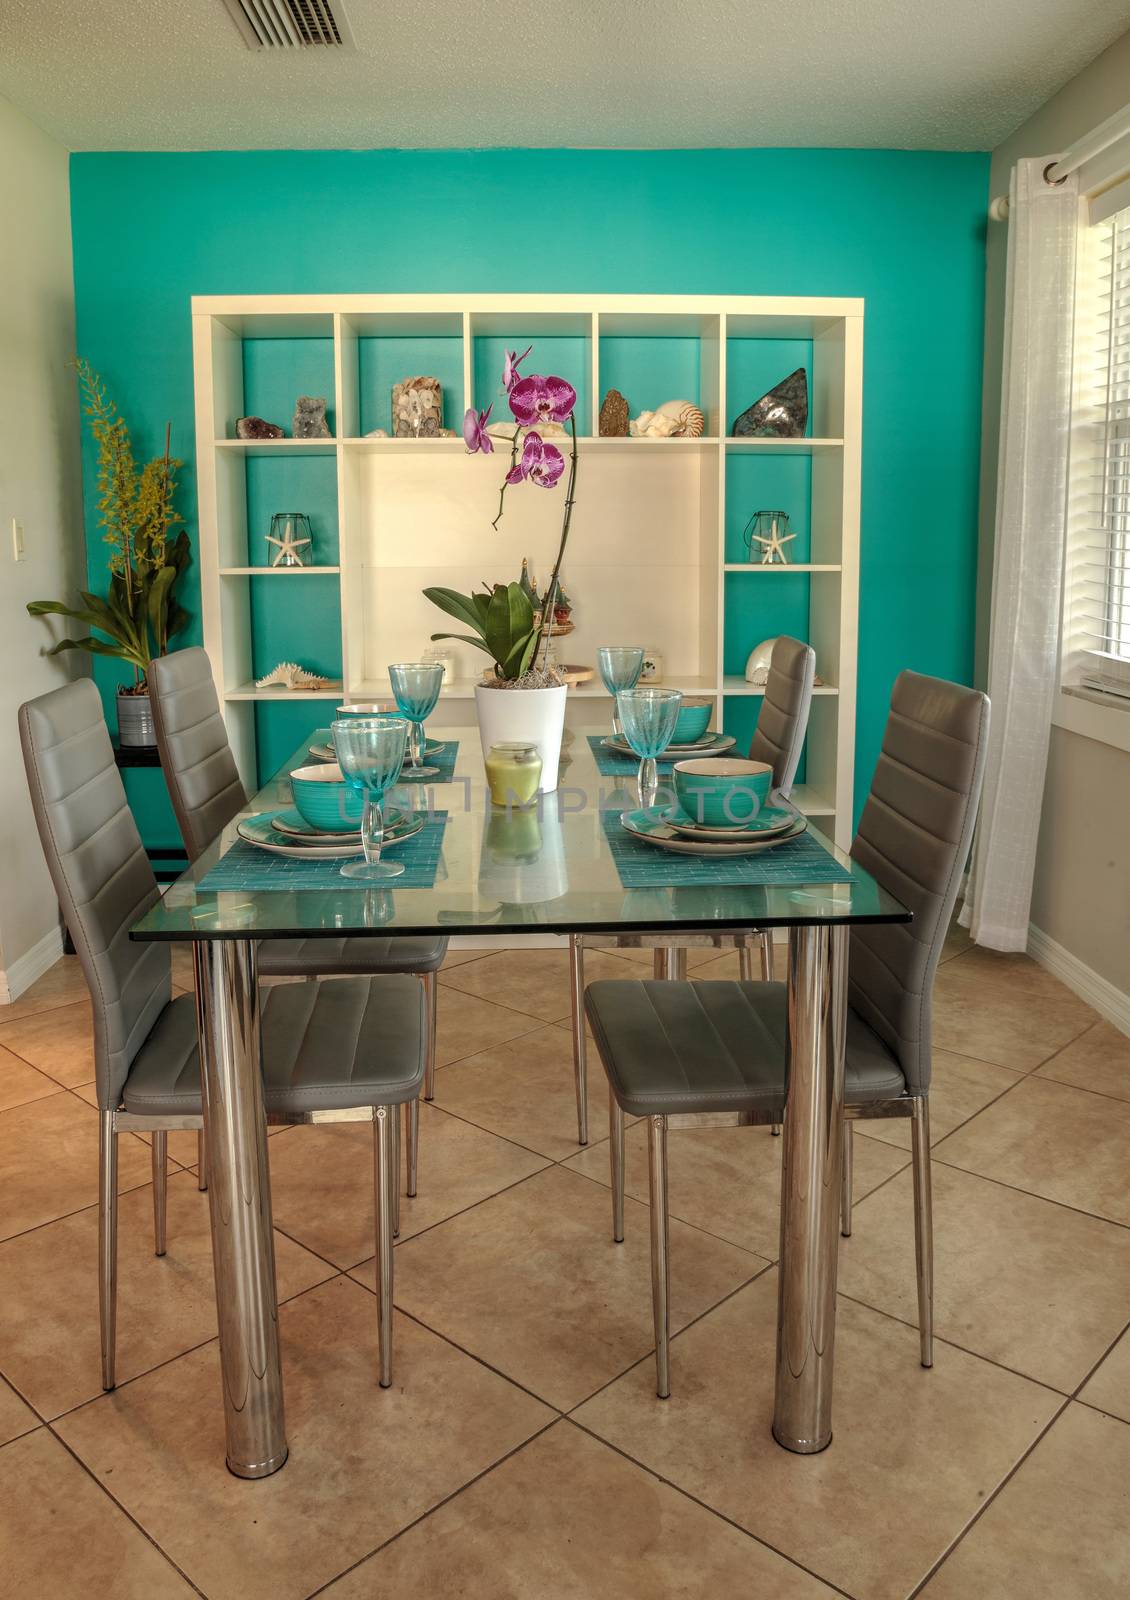 Glass dinner table with aqua blue dishes and a tropical nautical seashell background with a blue wall.